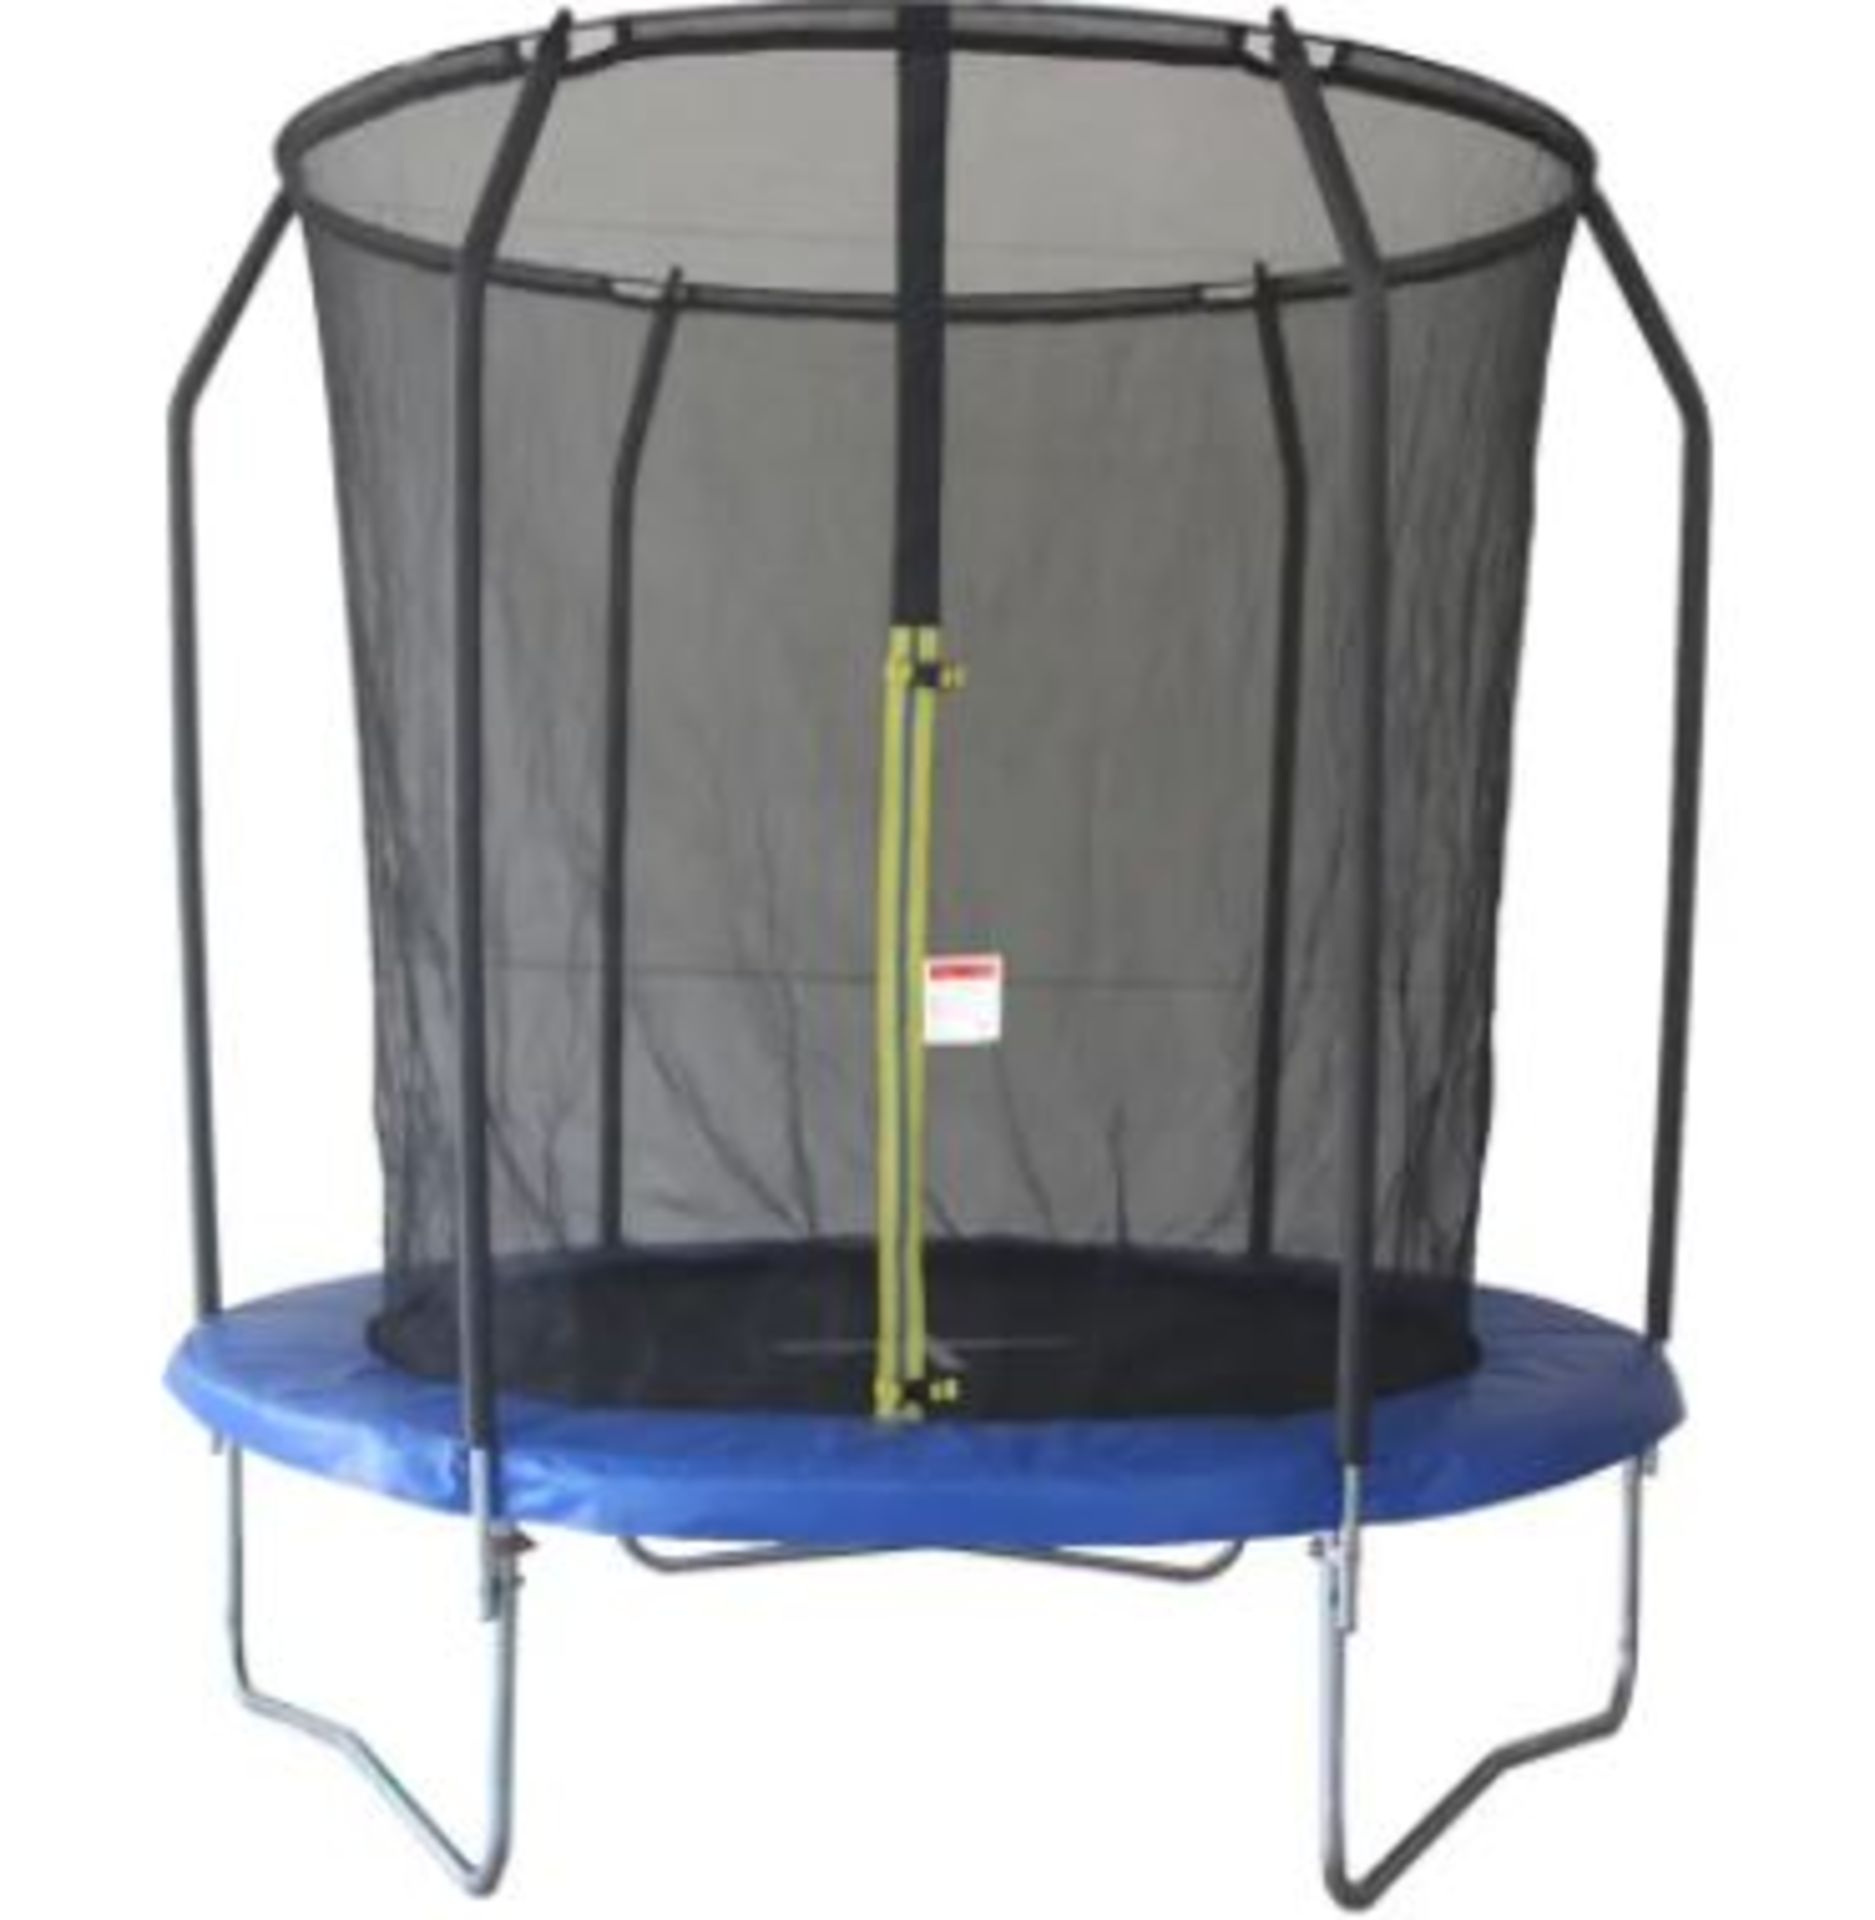 (R10H) 2 Items. 1 X 8FT Trampoline With Safety Enclosure. Galvanised Steel Frame With PVC Safety Pa